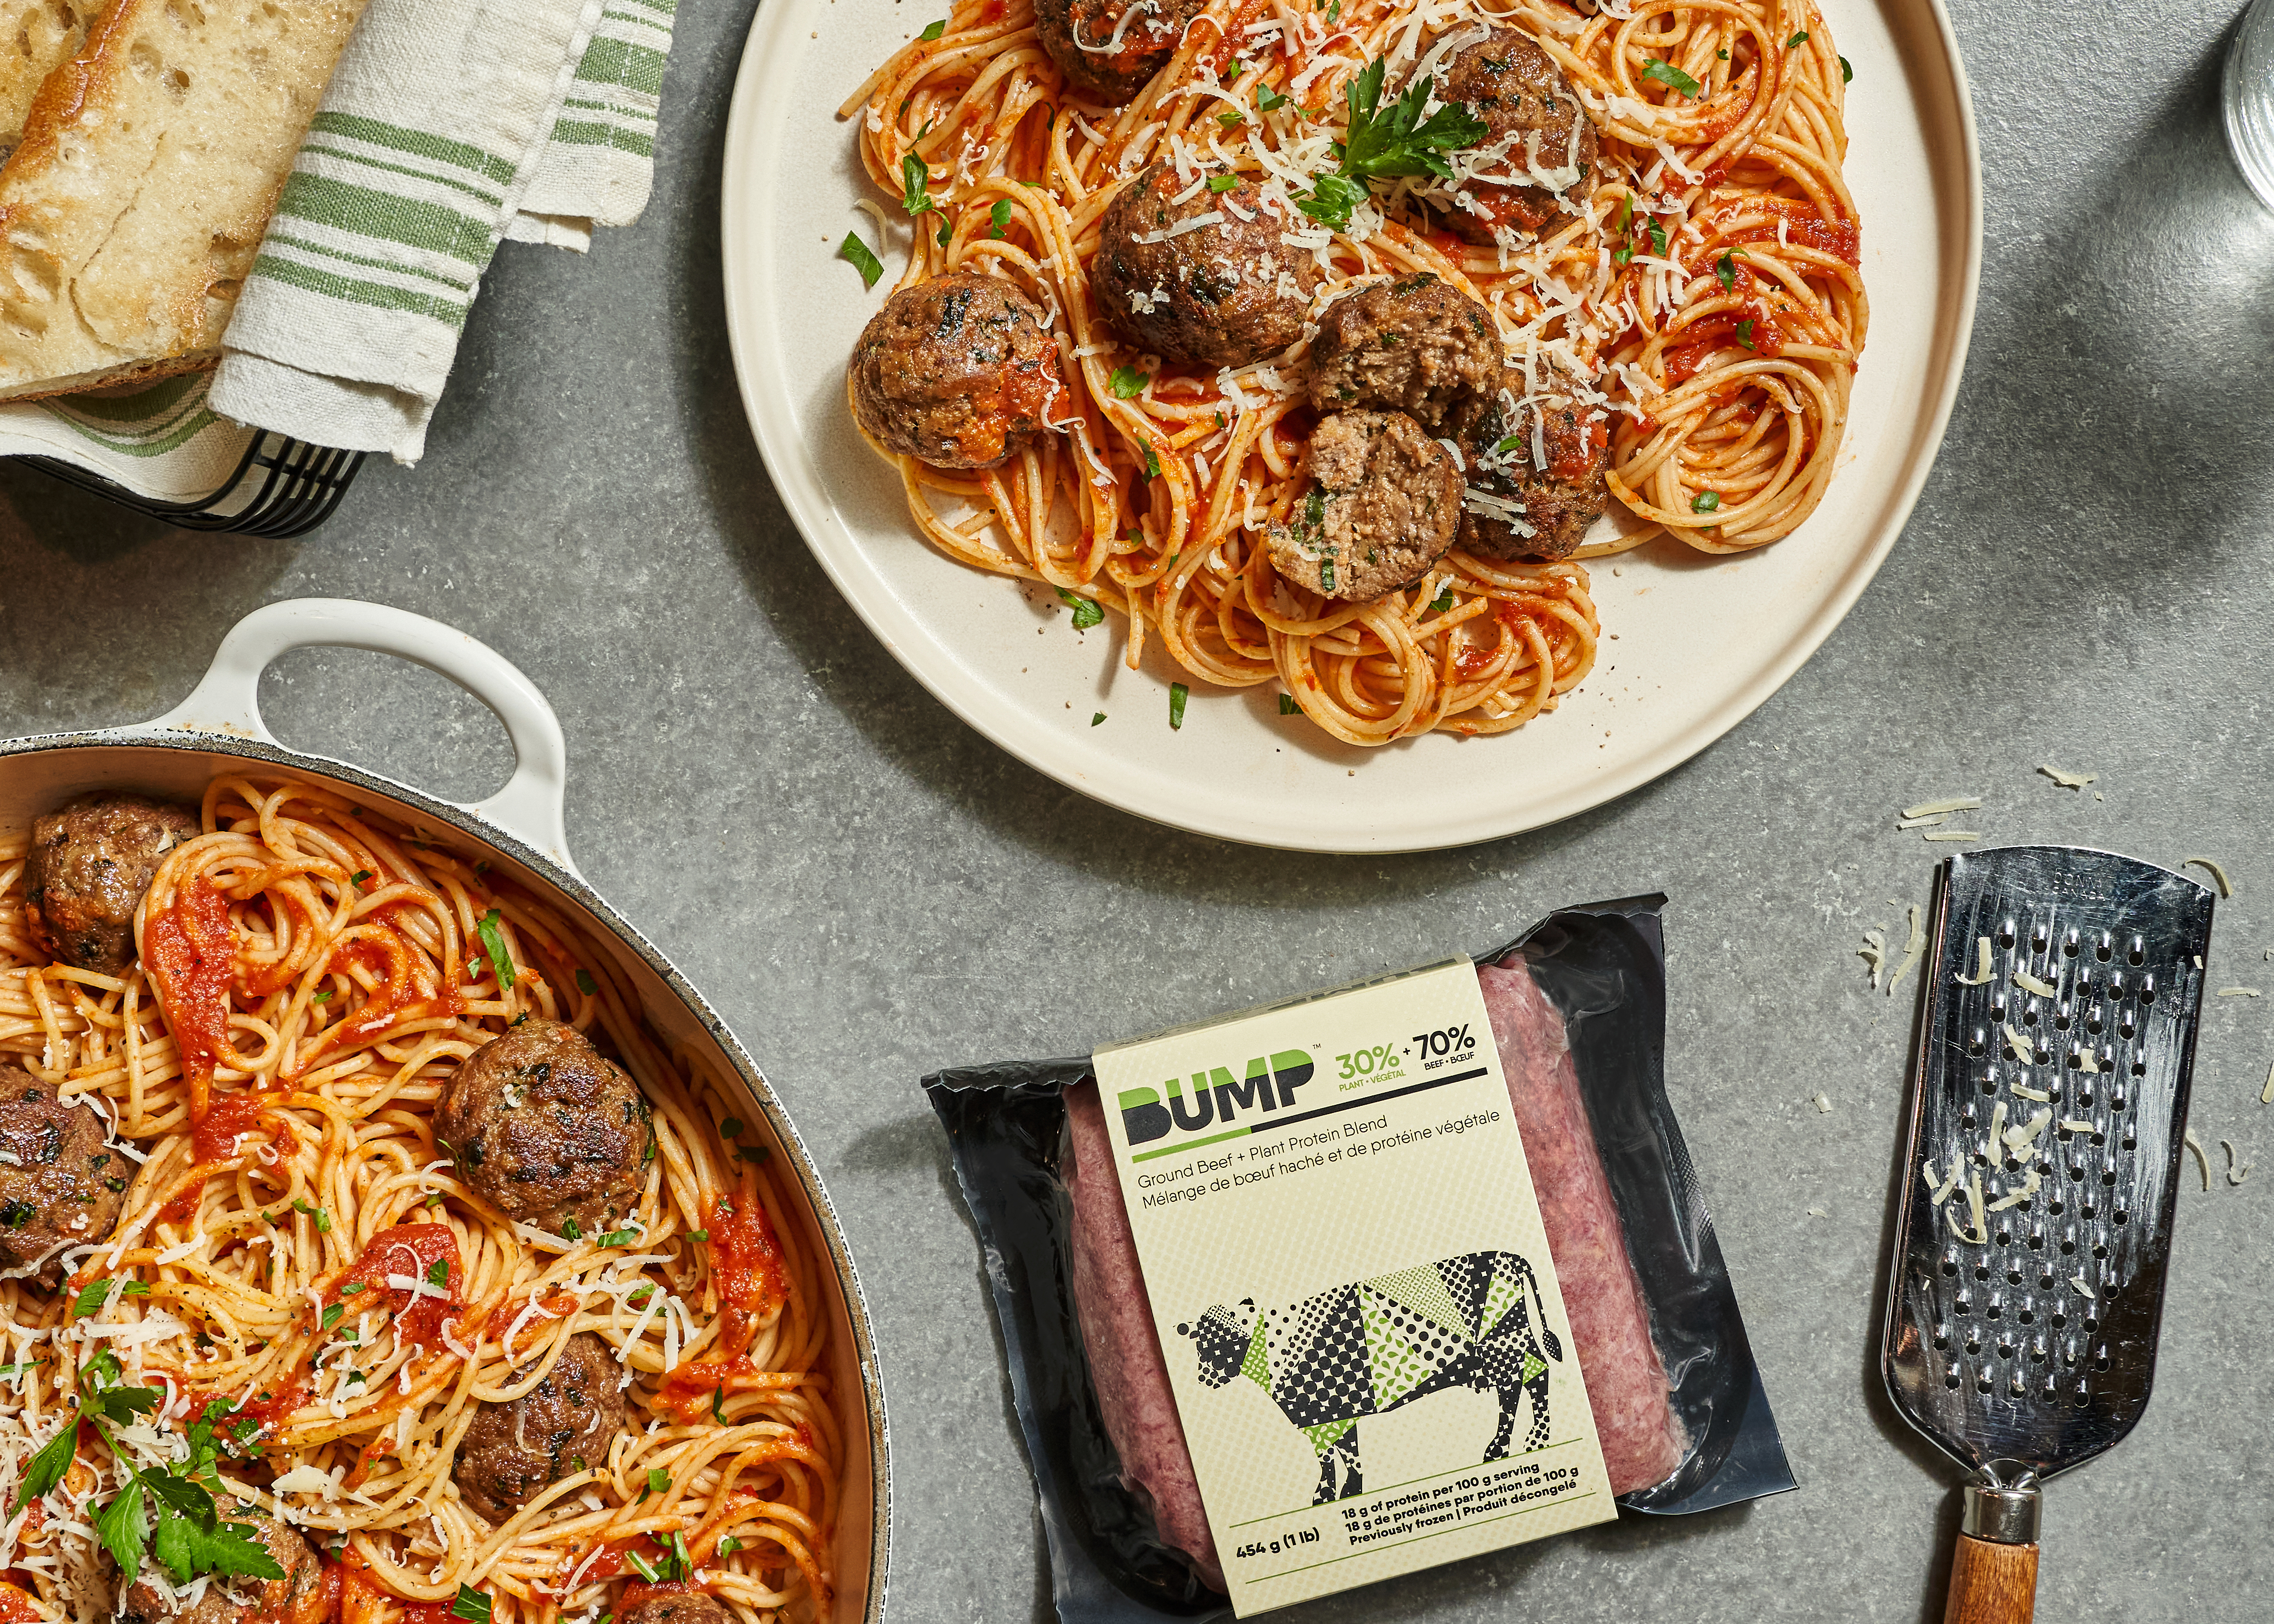 Photo of spaghetti and meatballs on a serving dish next to a package of Bump blended ground beef with plant-based proteins